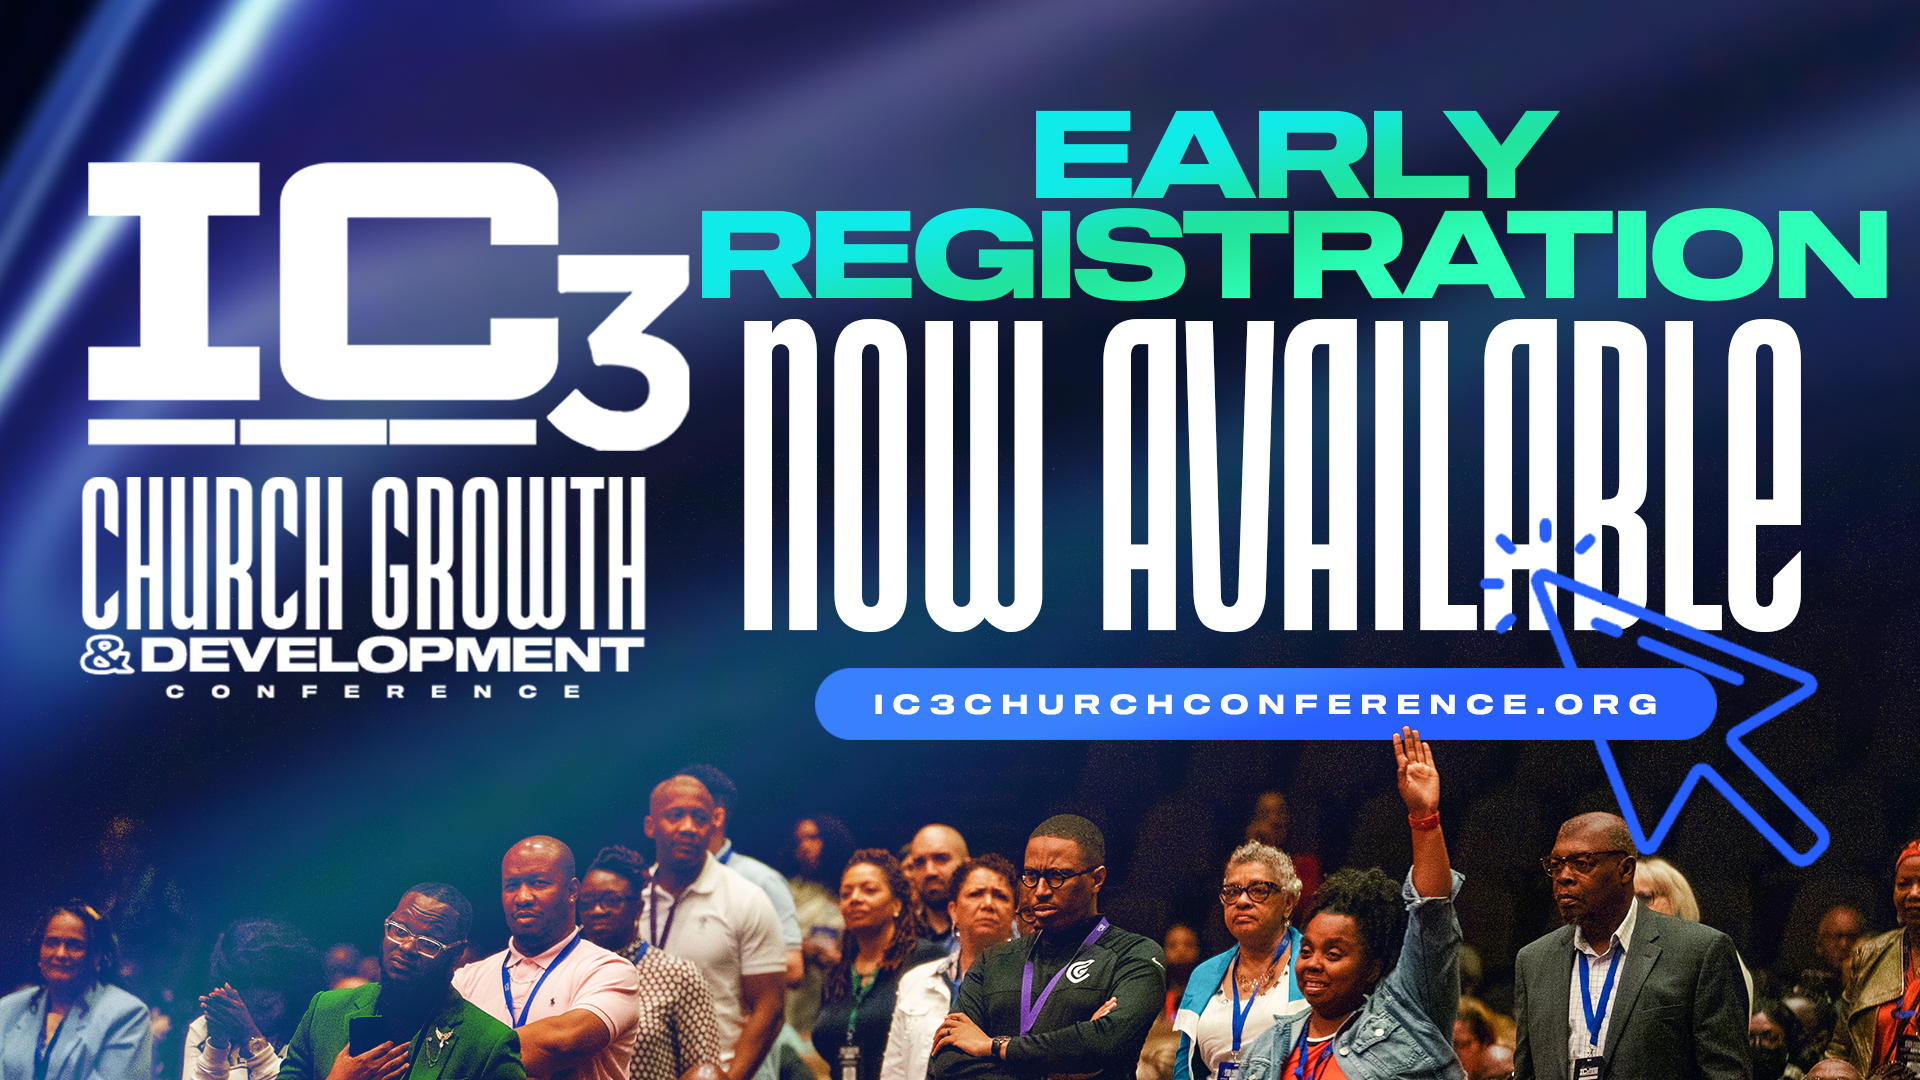 IC3 Church Growth and Development Conference